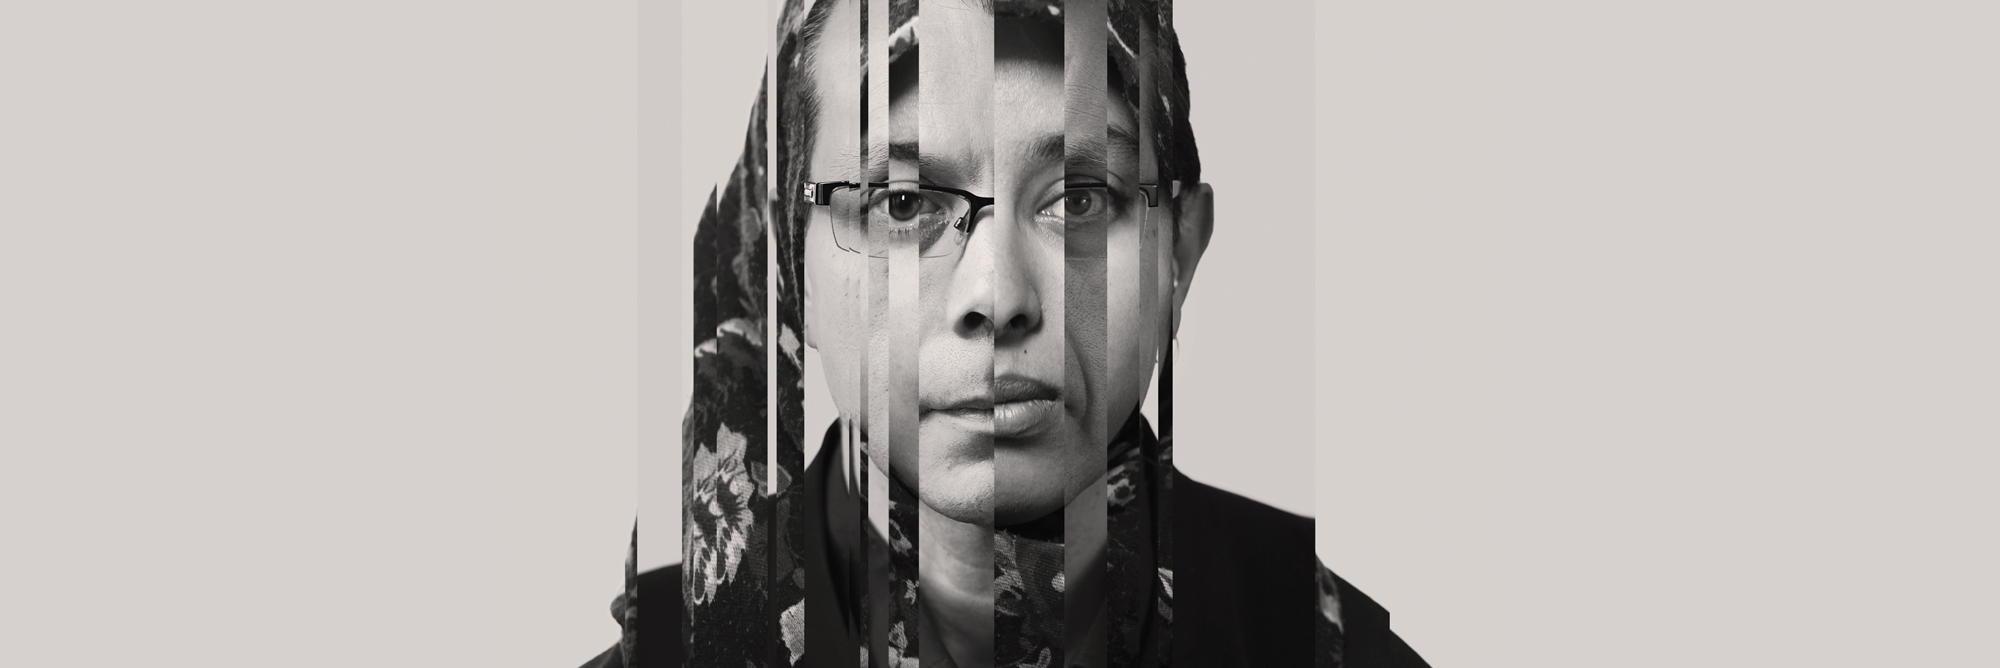 Two images of different Muslim individuals staring at the camera are spliced together in vertical lines.